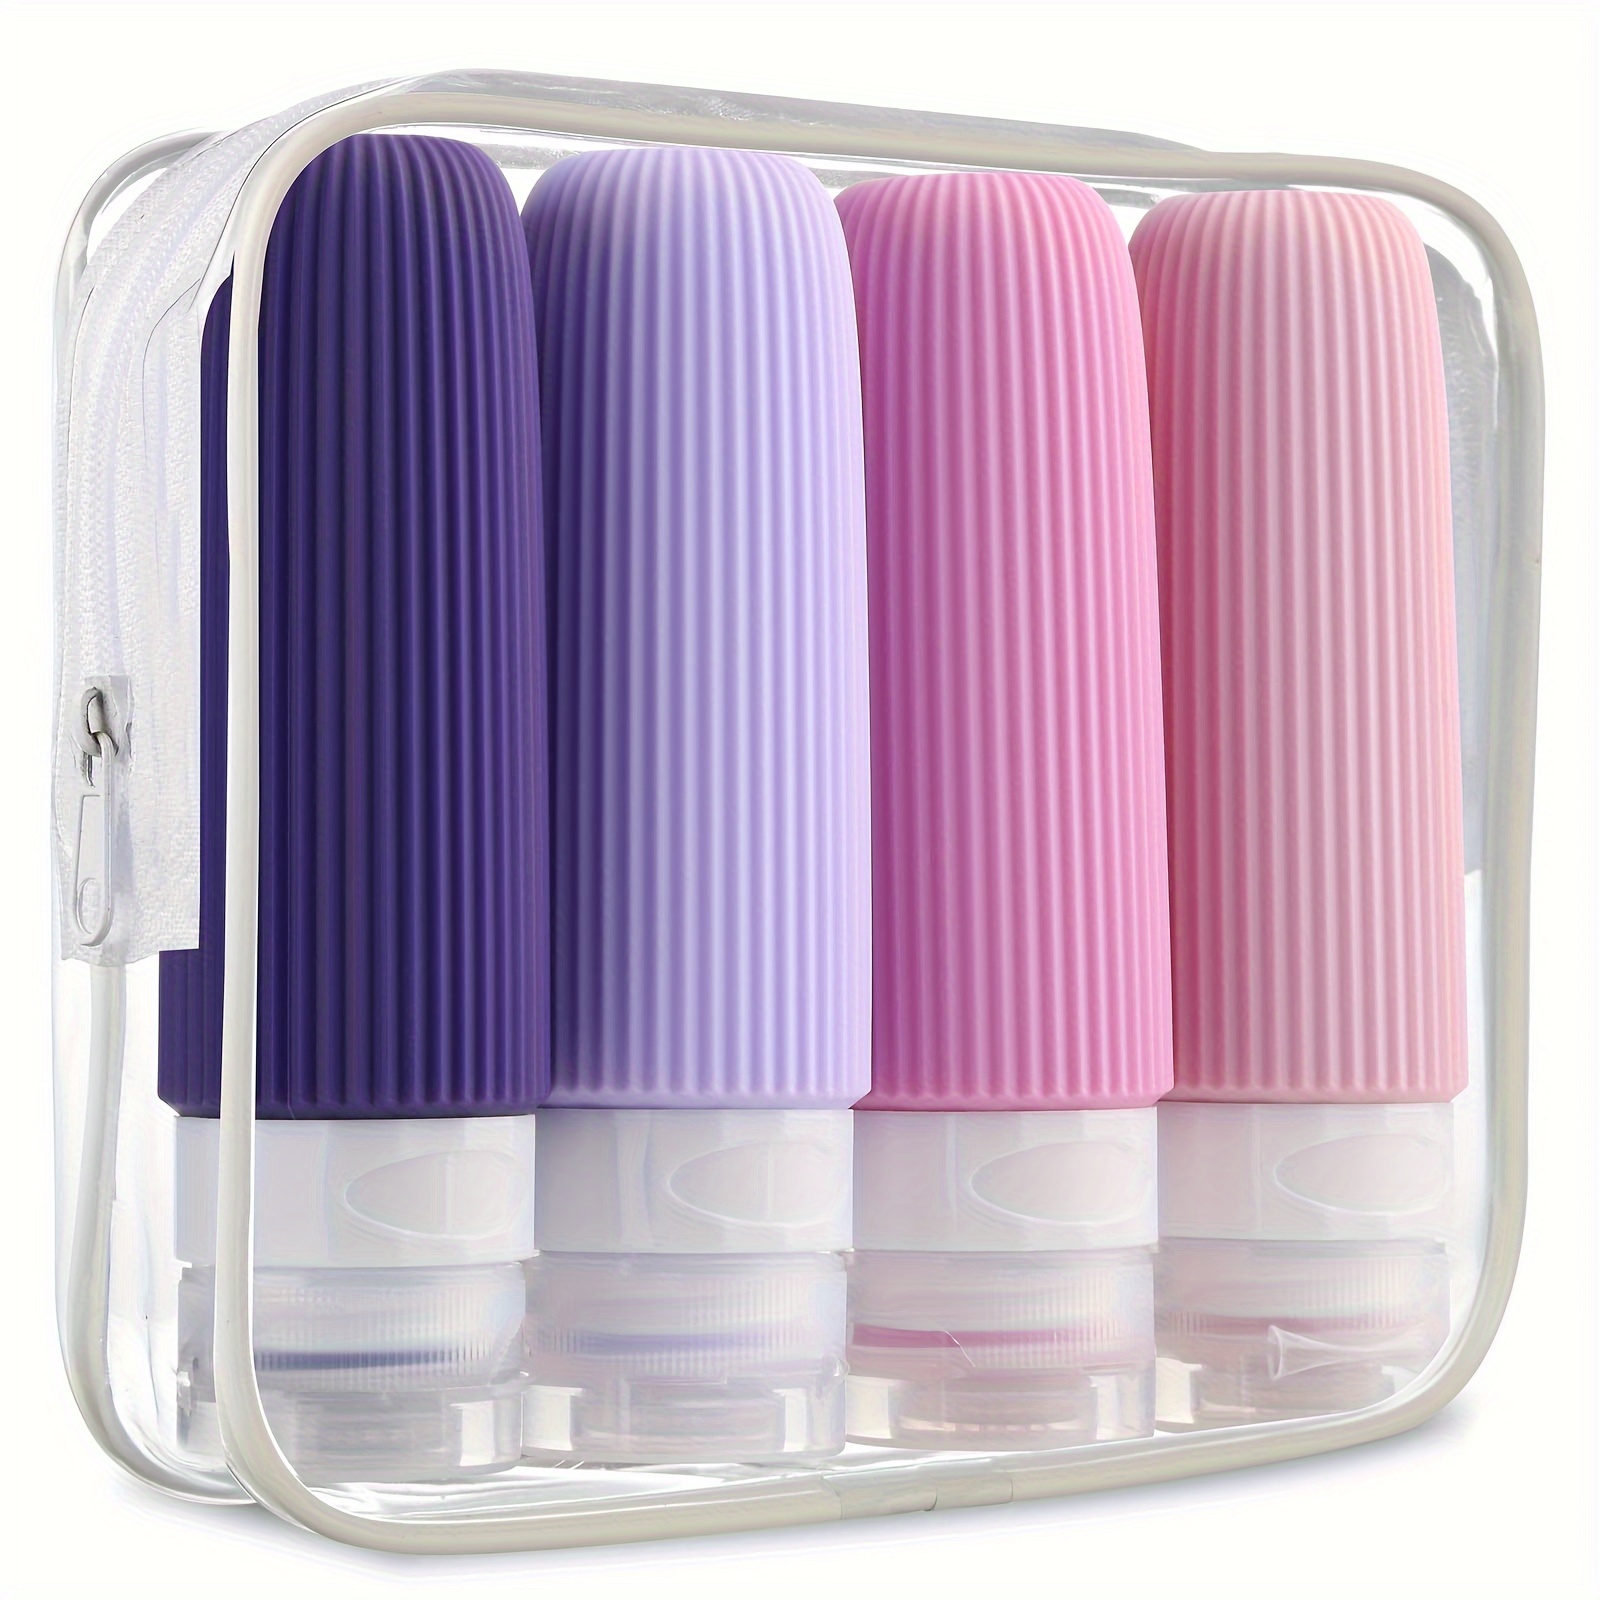 

4pcs Silicone Travel Bottles, Tsa Approved - Leak Proof, Squeezable, Bpa Free, Toiletry Containers - Includes Clear Toiletry Bag - Perfect For On-the-go Beauty And Hygiene Needs, 3oz